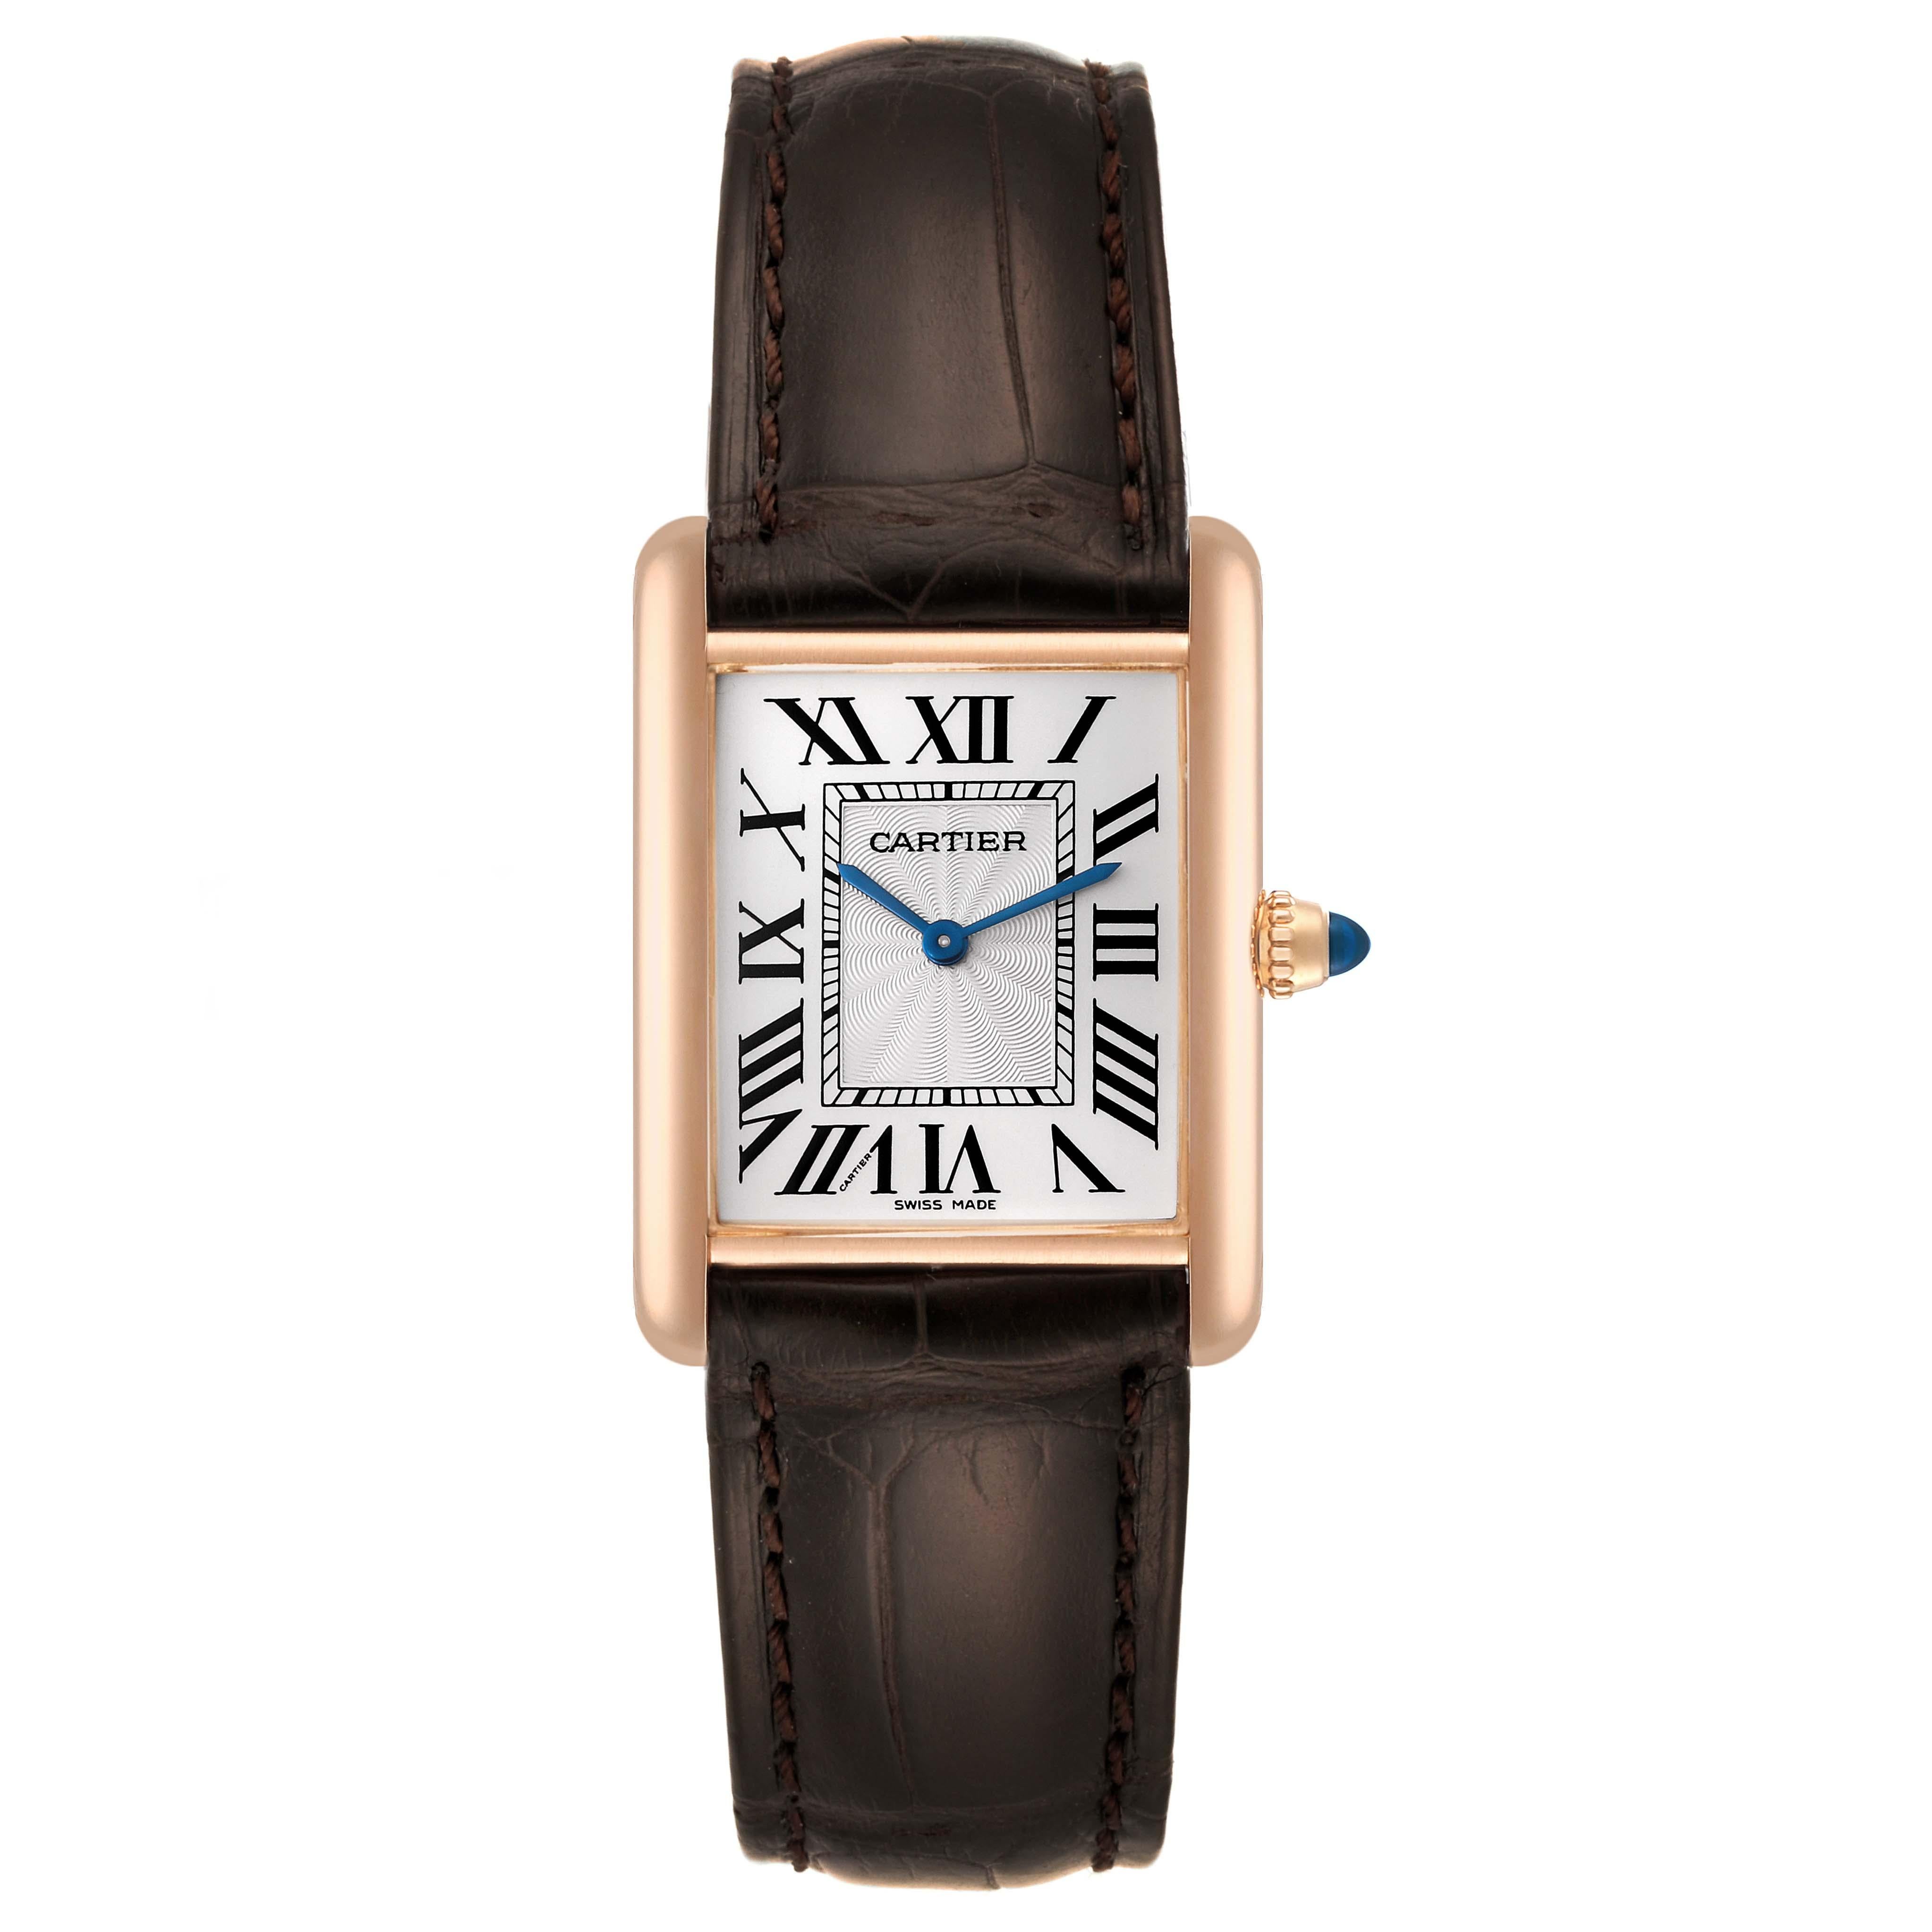 Cartier Tank Louis Rose Gold Mechanical Mens Watch WGTA0011 Card. Manual winding movement. 18k rose gold case 25 mm x 33 mm. Circular grained crown set with a blue sapphire cabochon. . Mineral crystal. Silvered guilloche dial with black Roman